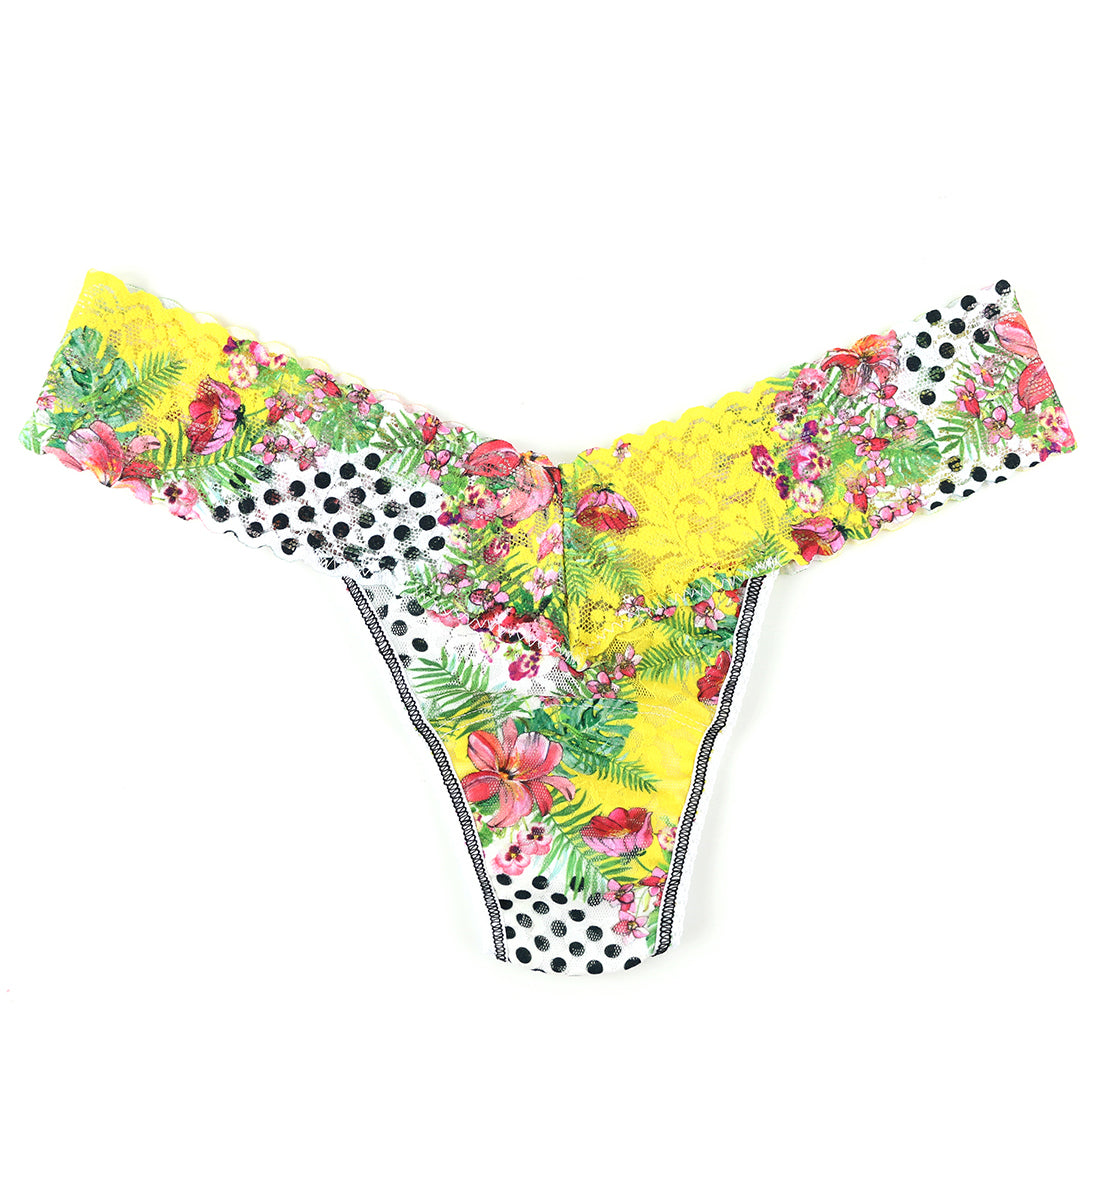 Hanky Panky Decades Teens Floral Mashup Low Rise Thong (MIX TAPE BOX) - Teens Floral Mashup,One Size